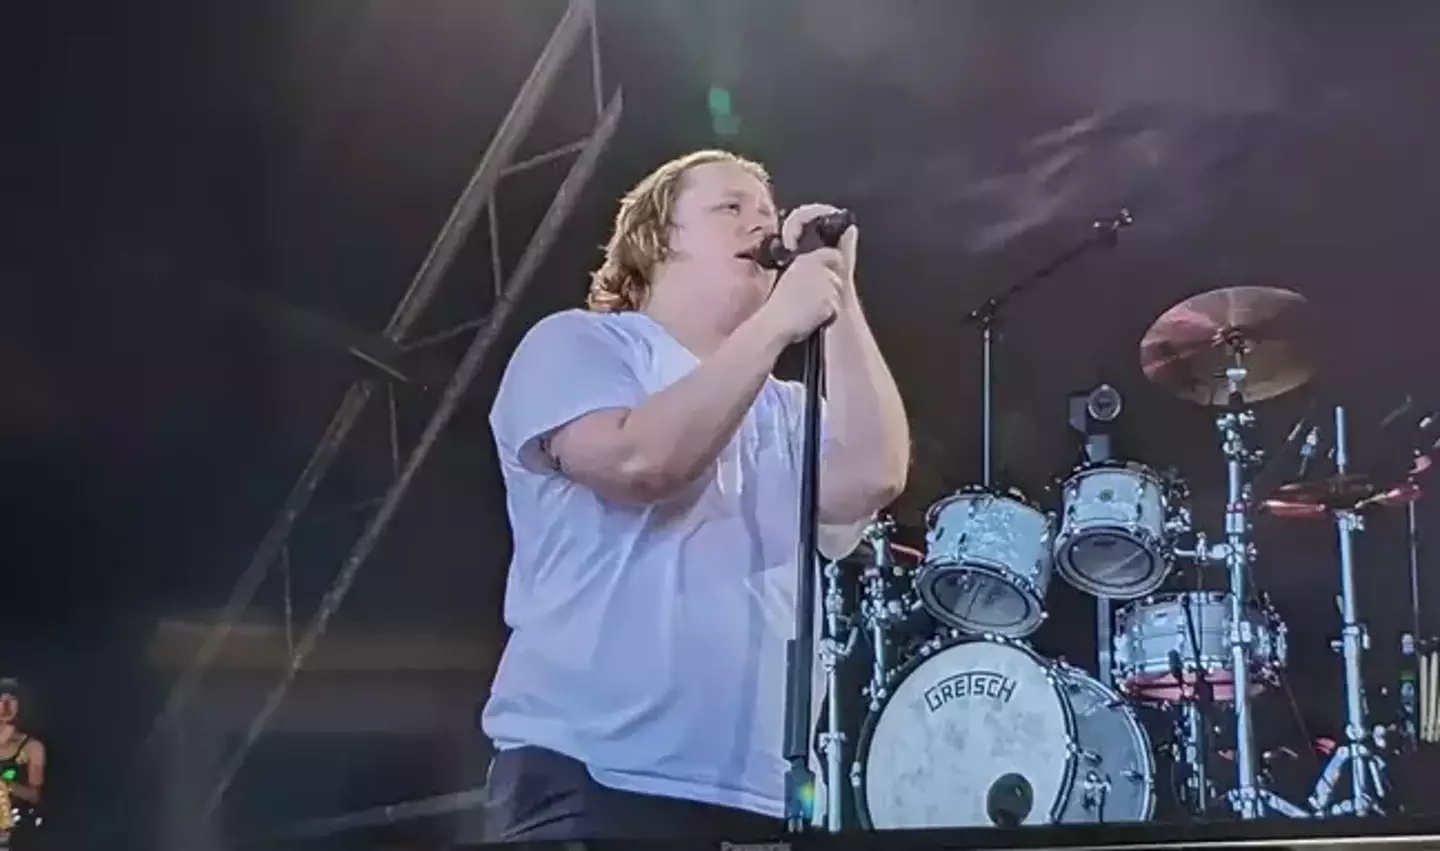 In June, Lewis Capaldi announced that he would be taking an indefinite break from touring.